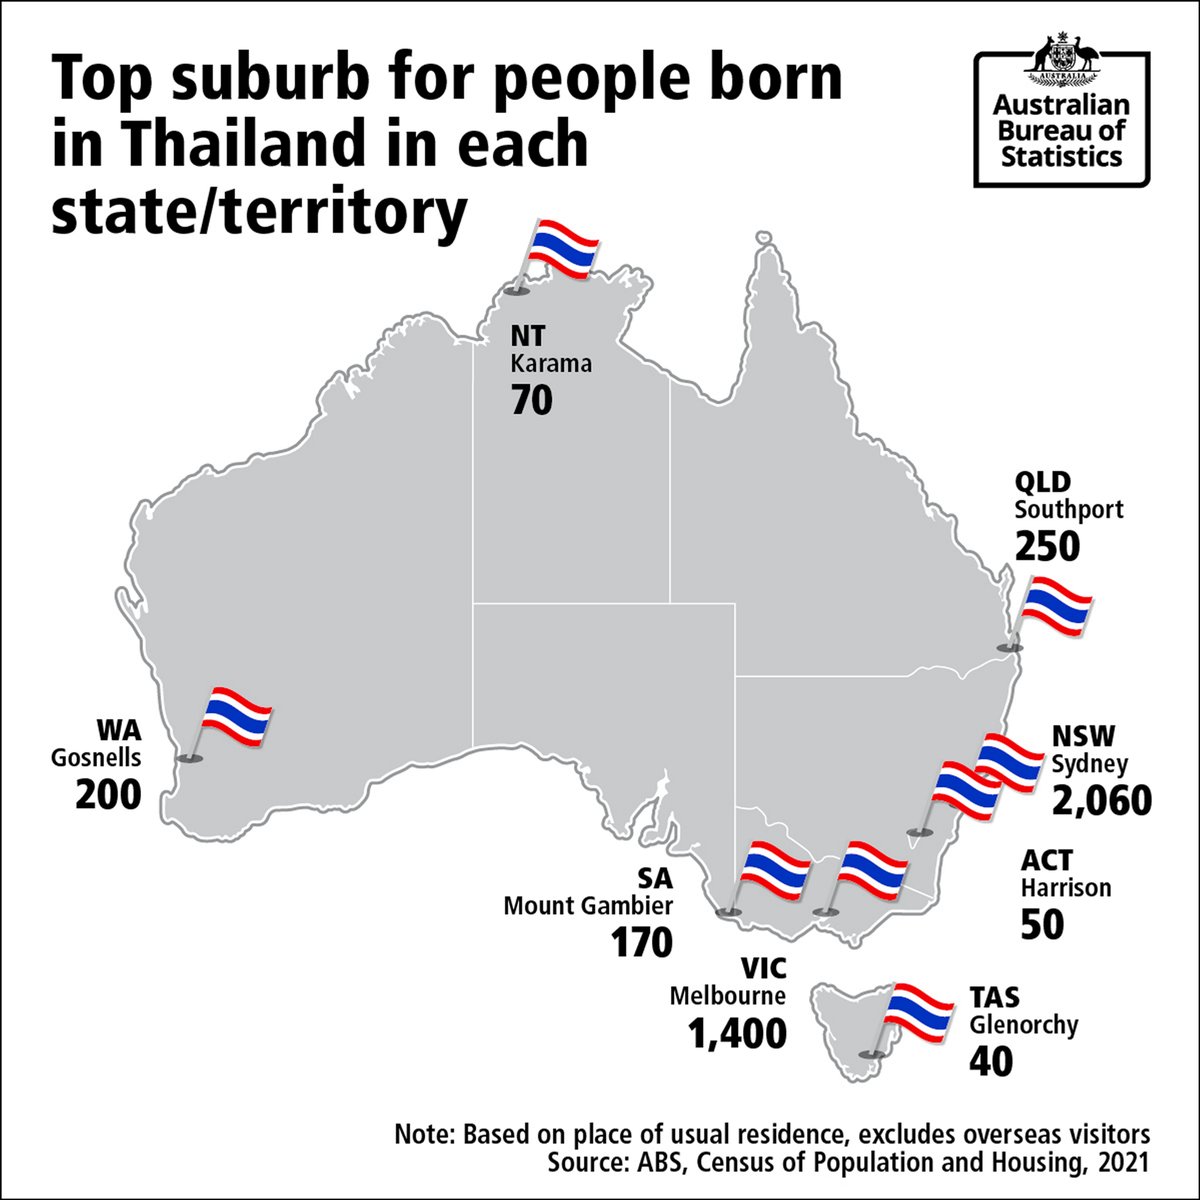 Here are the top suburbs for people born in Thailand in each state and territory. Sydney City, NSW takes the top spot with 2,060 Thai residents! 🇹🇭